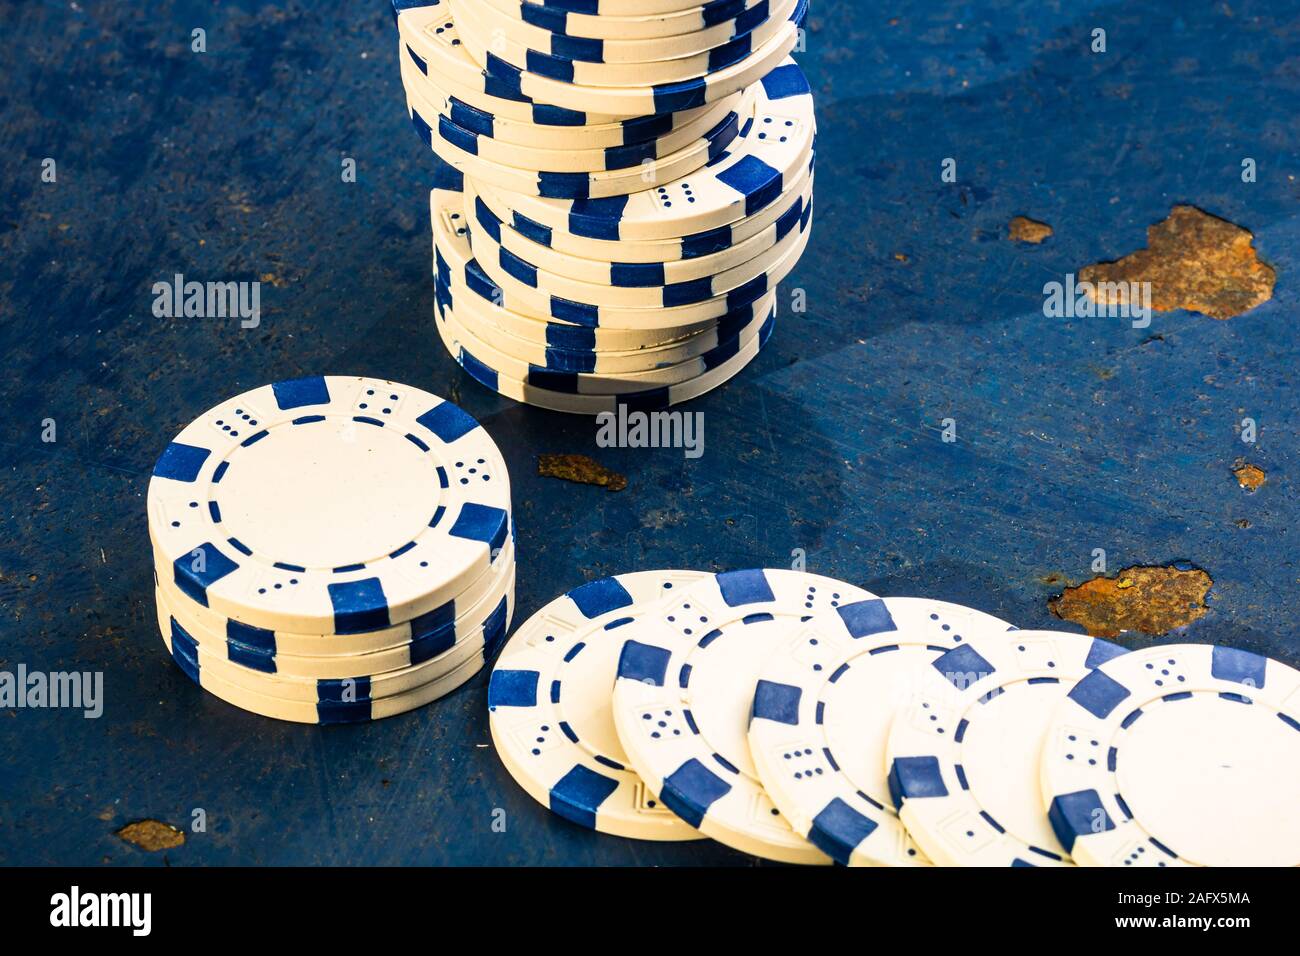 Game Currency High Resolution Stock Photography And Images Alamy - robux gambling